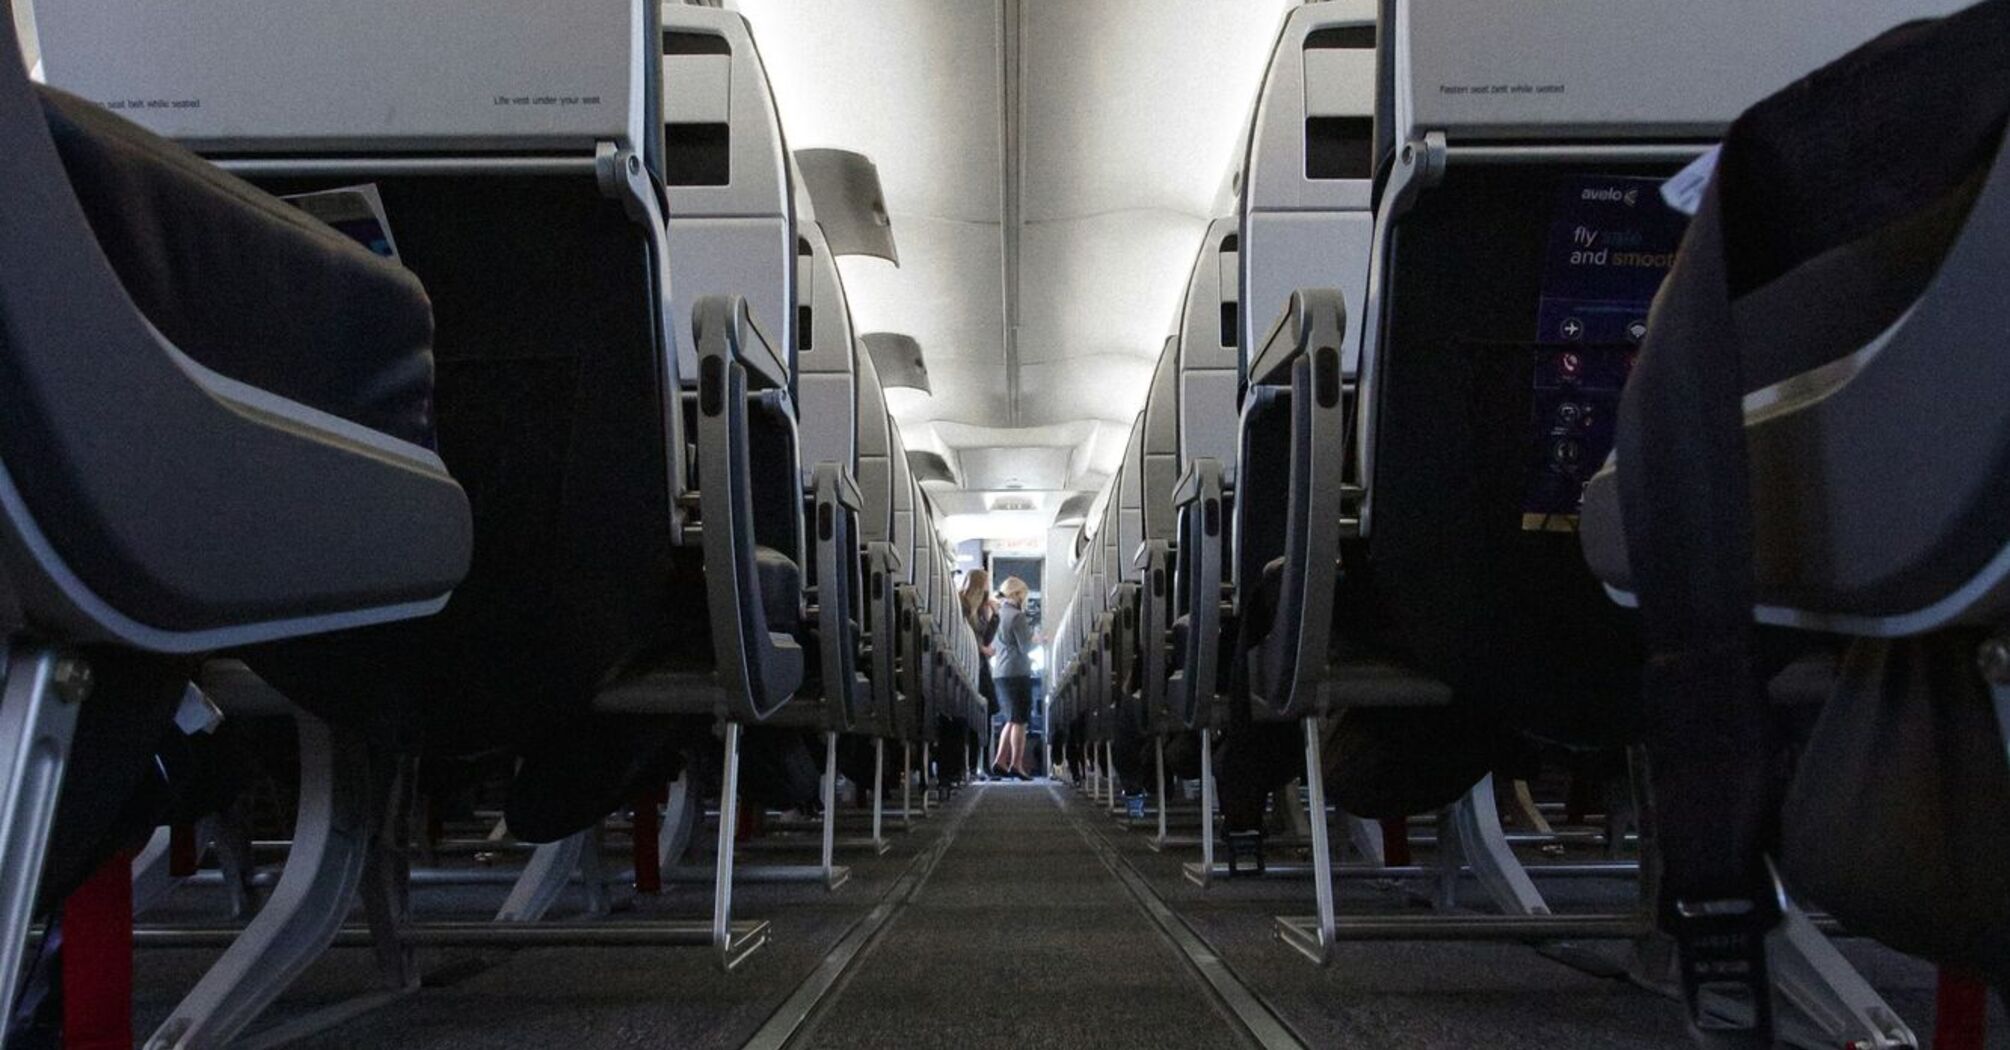 Interior view of an airplane aisle with rows of seats